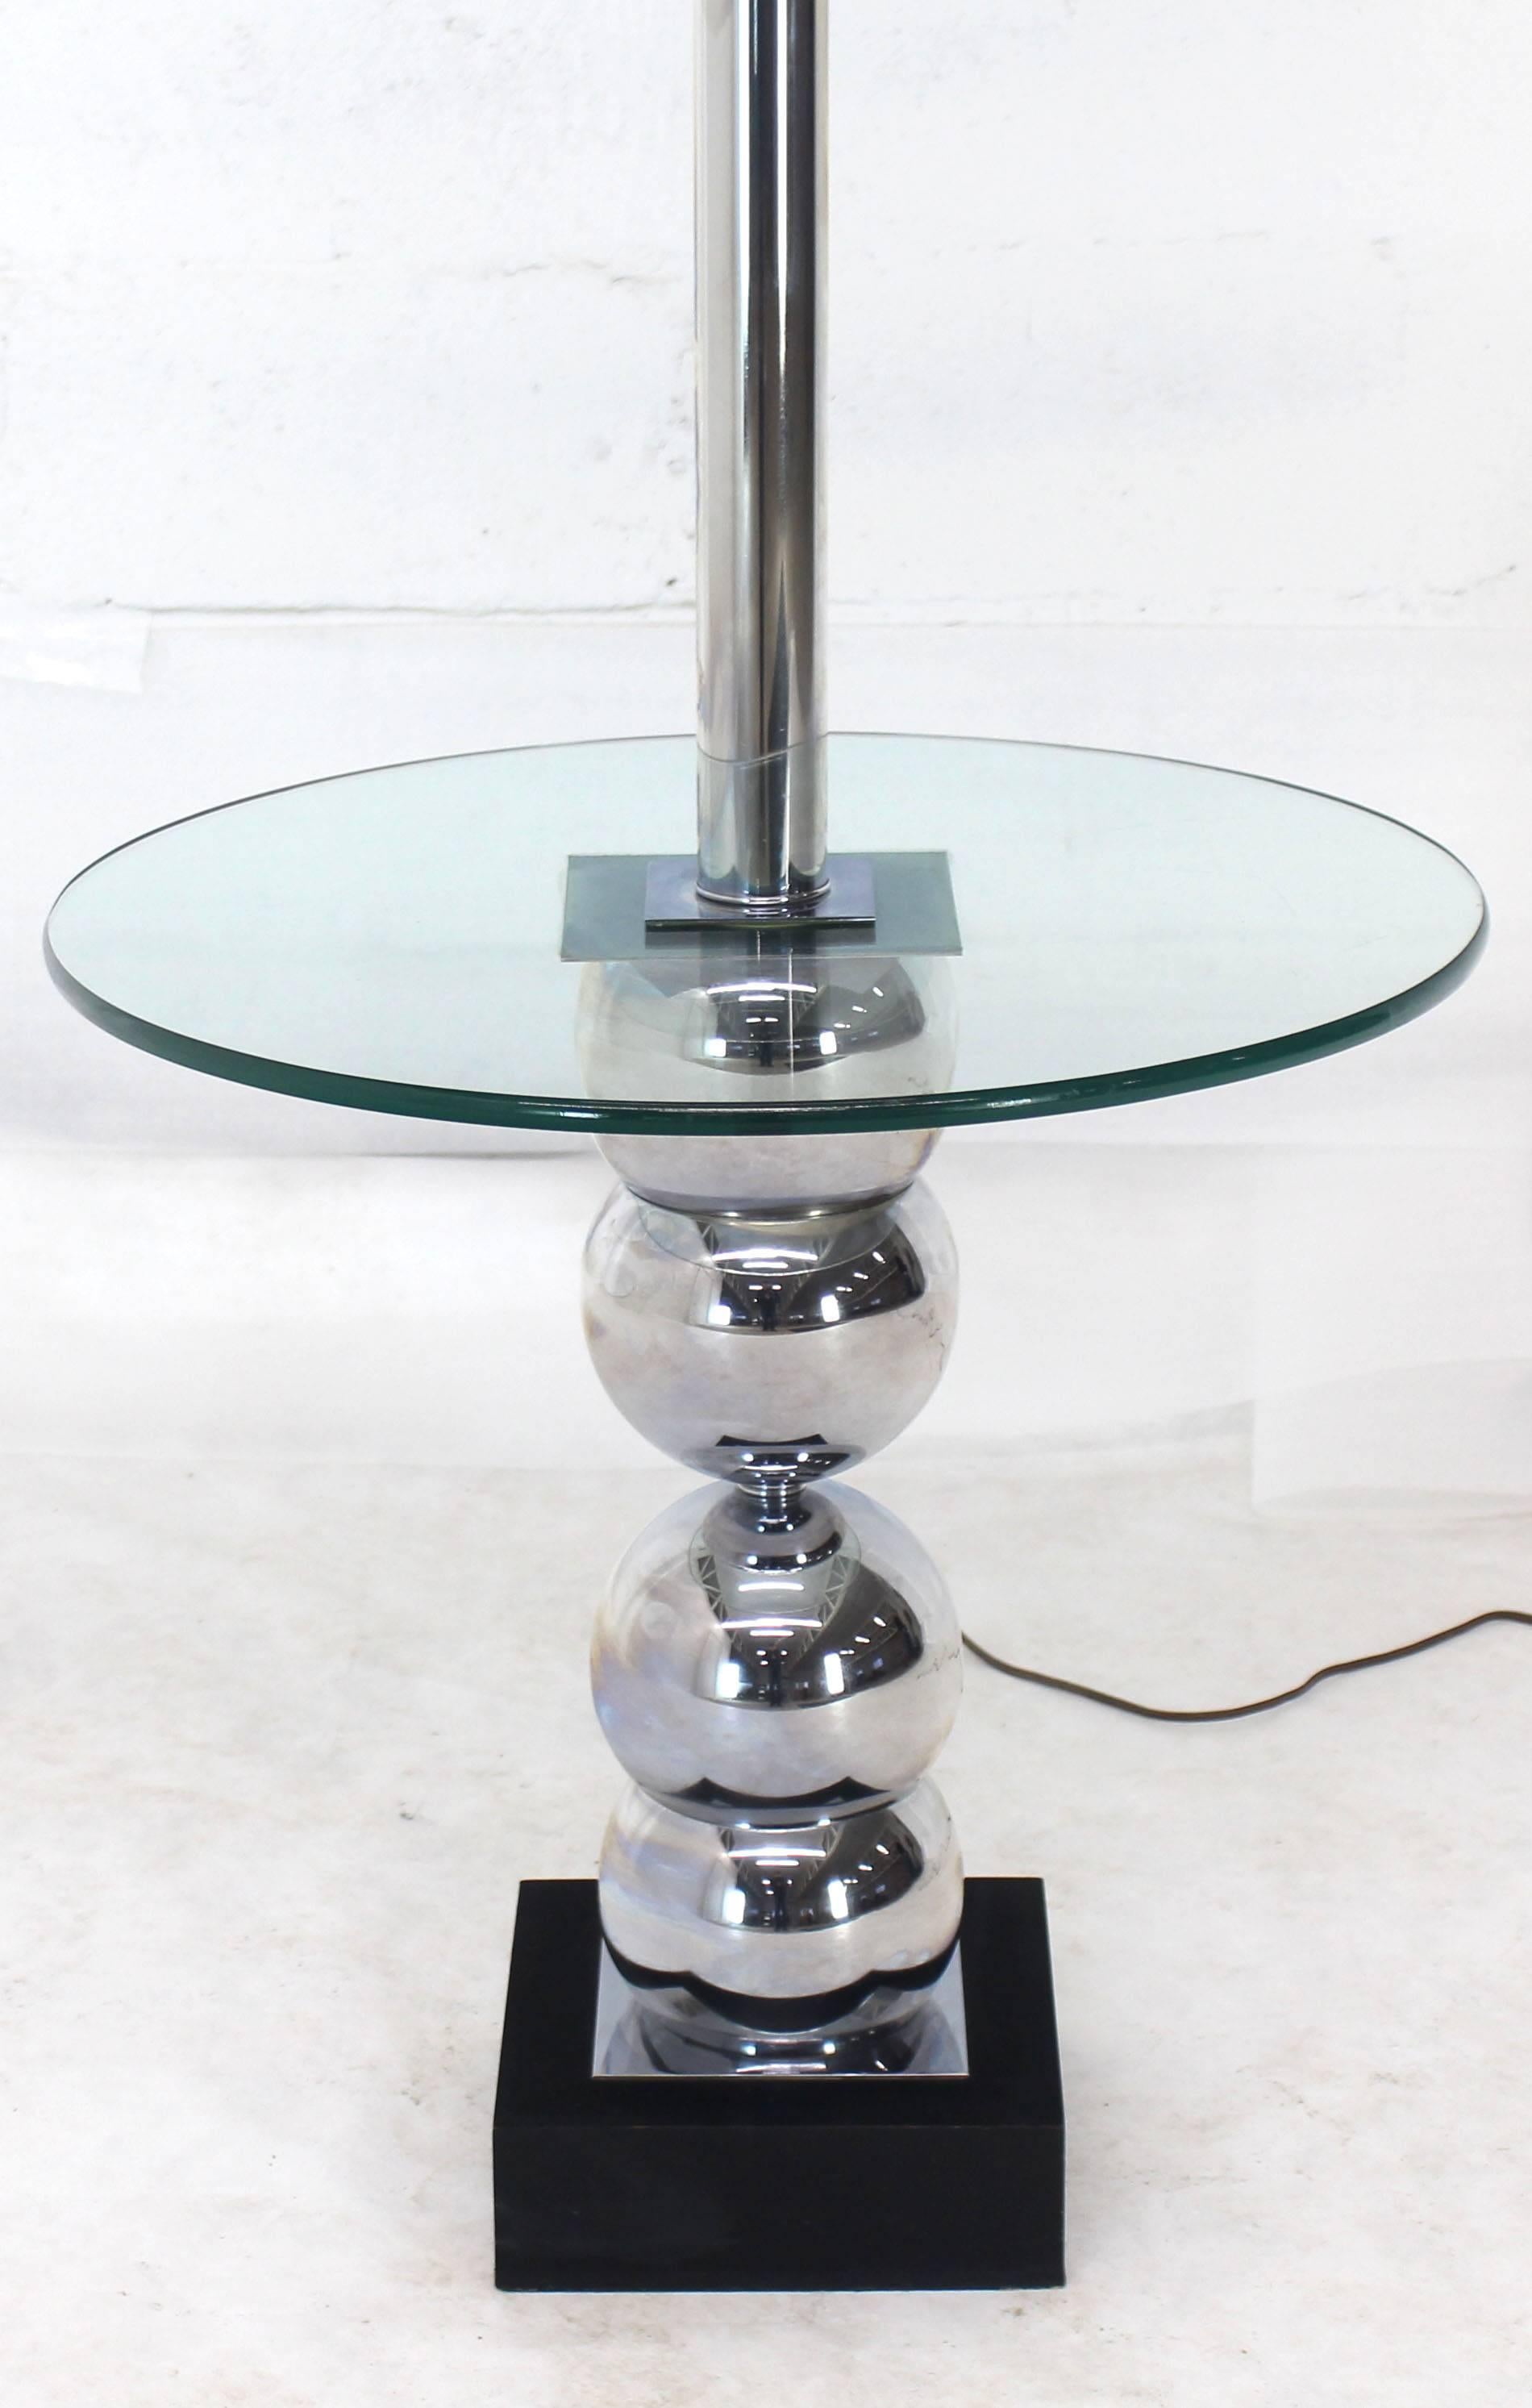 glass table with lamp attached